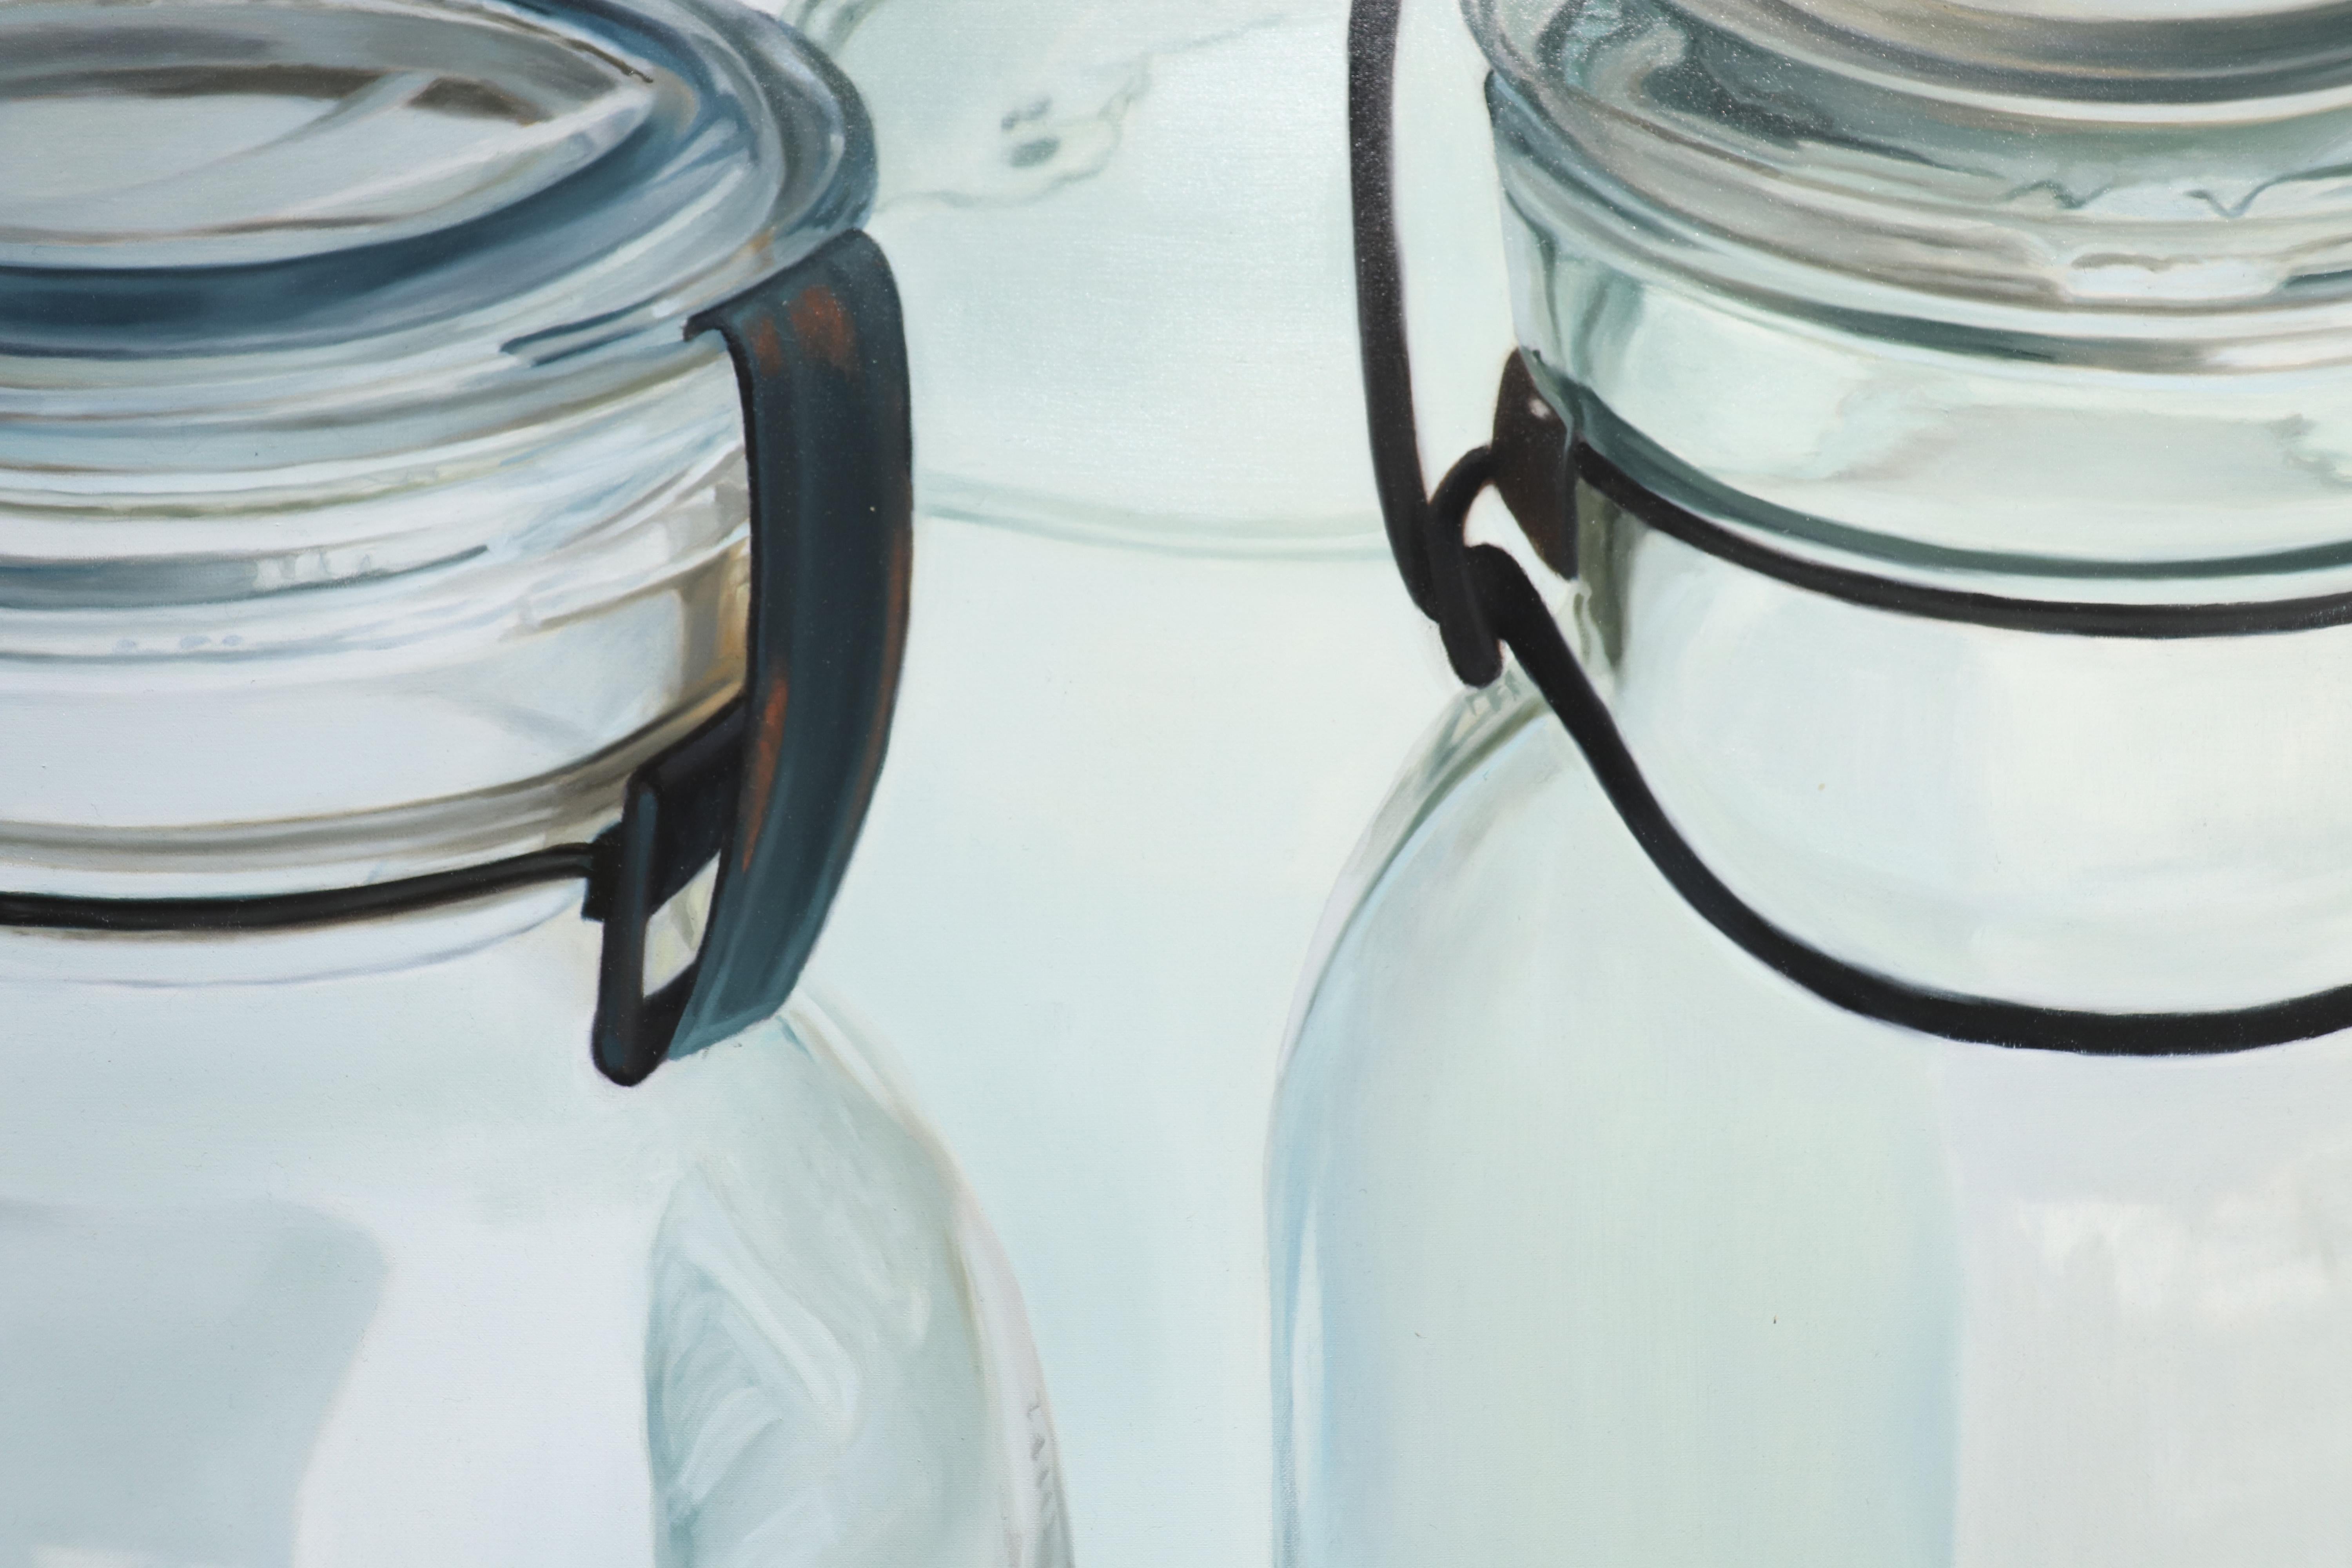 BEYOND THE PALE - Photorealism / Still Life / Glass and Light - Photorealist Painting by Steve Smulka